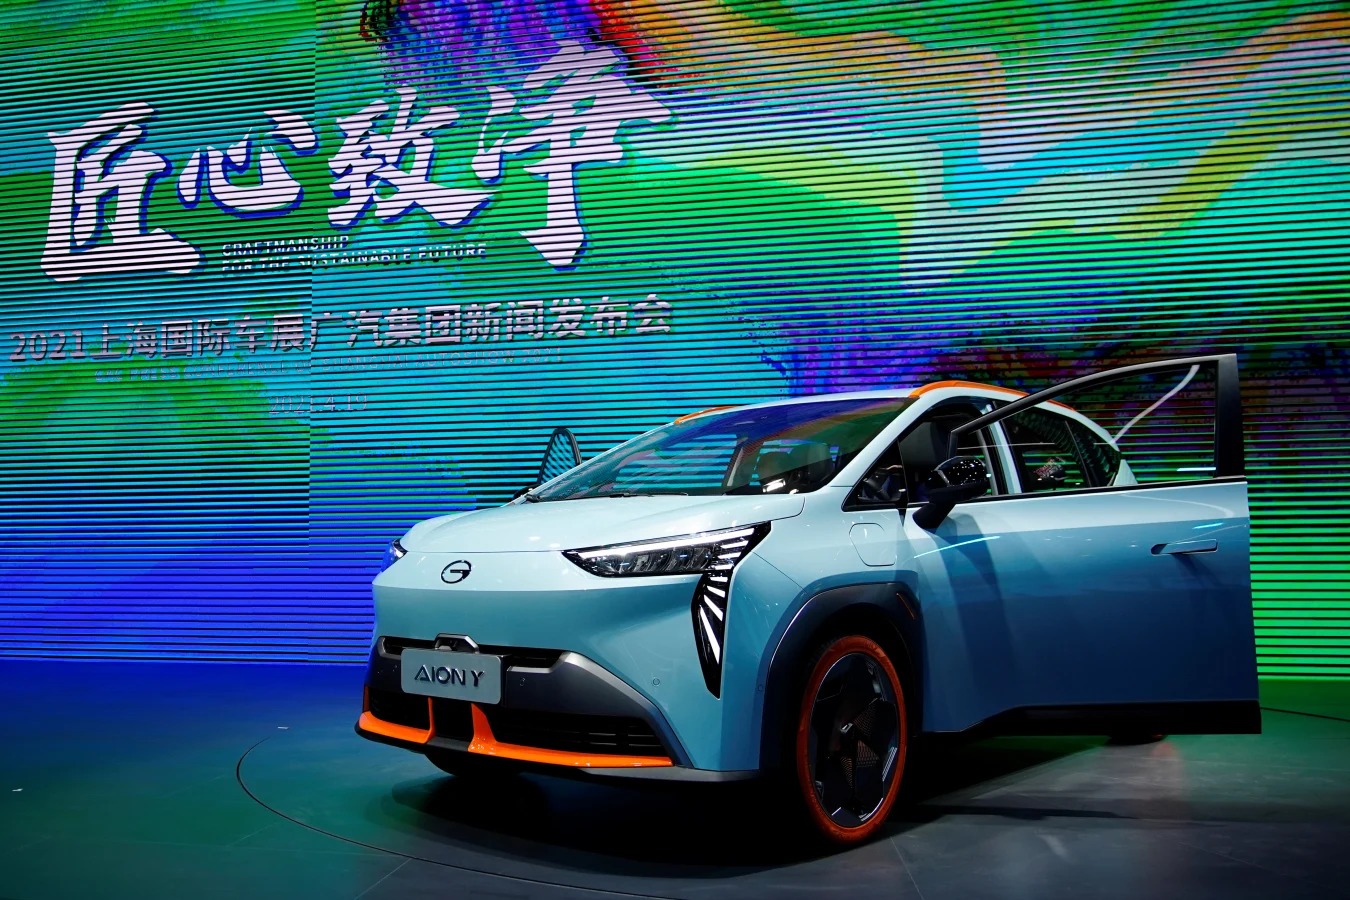 A GAC Aion Y electric vehicle (EV) is seen displayed at the booth of GAC Group during a media day for the Auto Shanghai show in Shanghai, China April 19, 2021. REUTERS/Aly Song